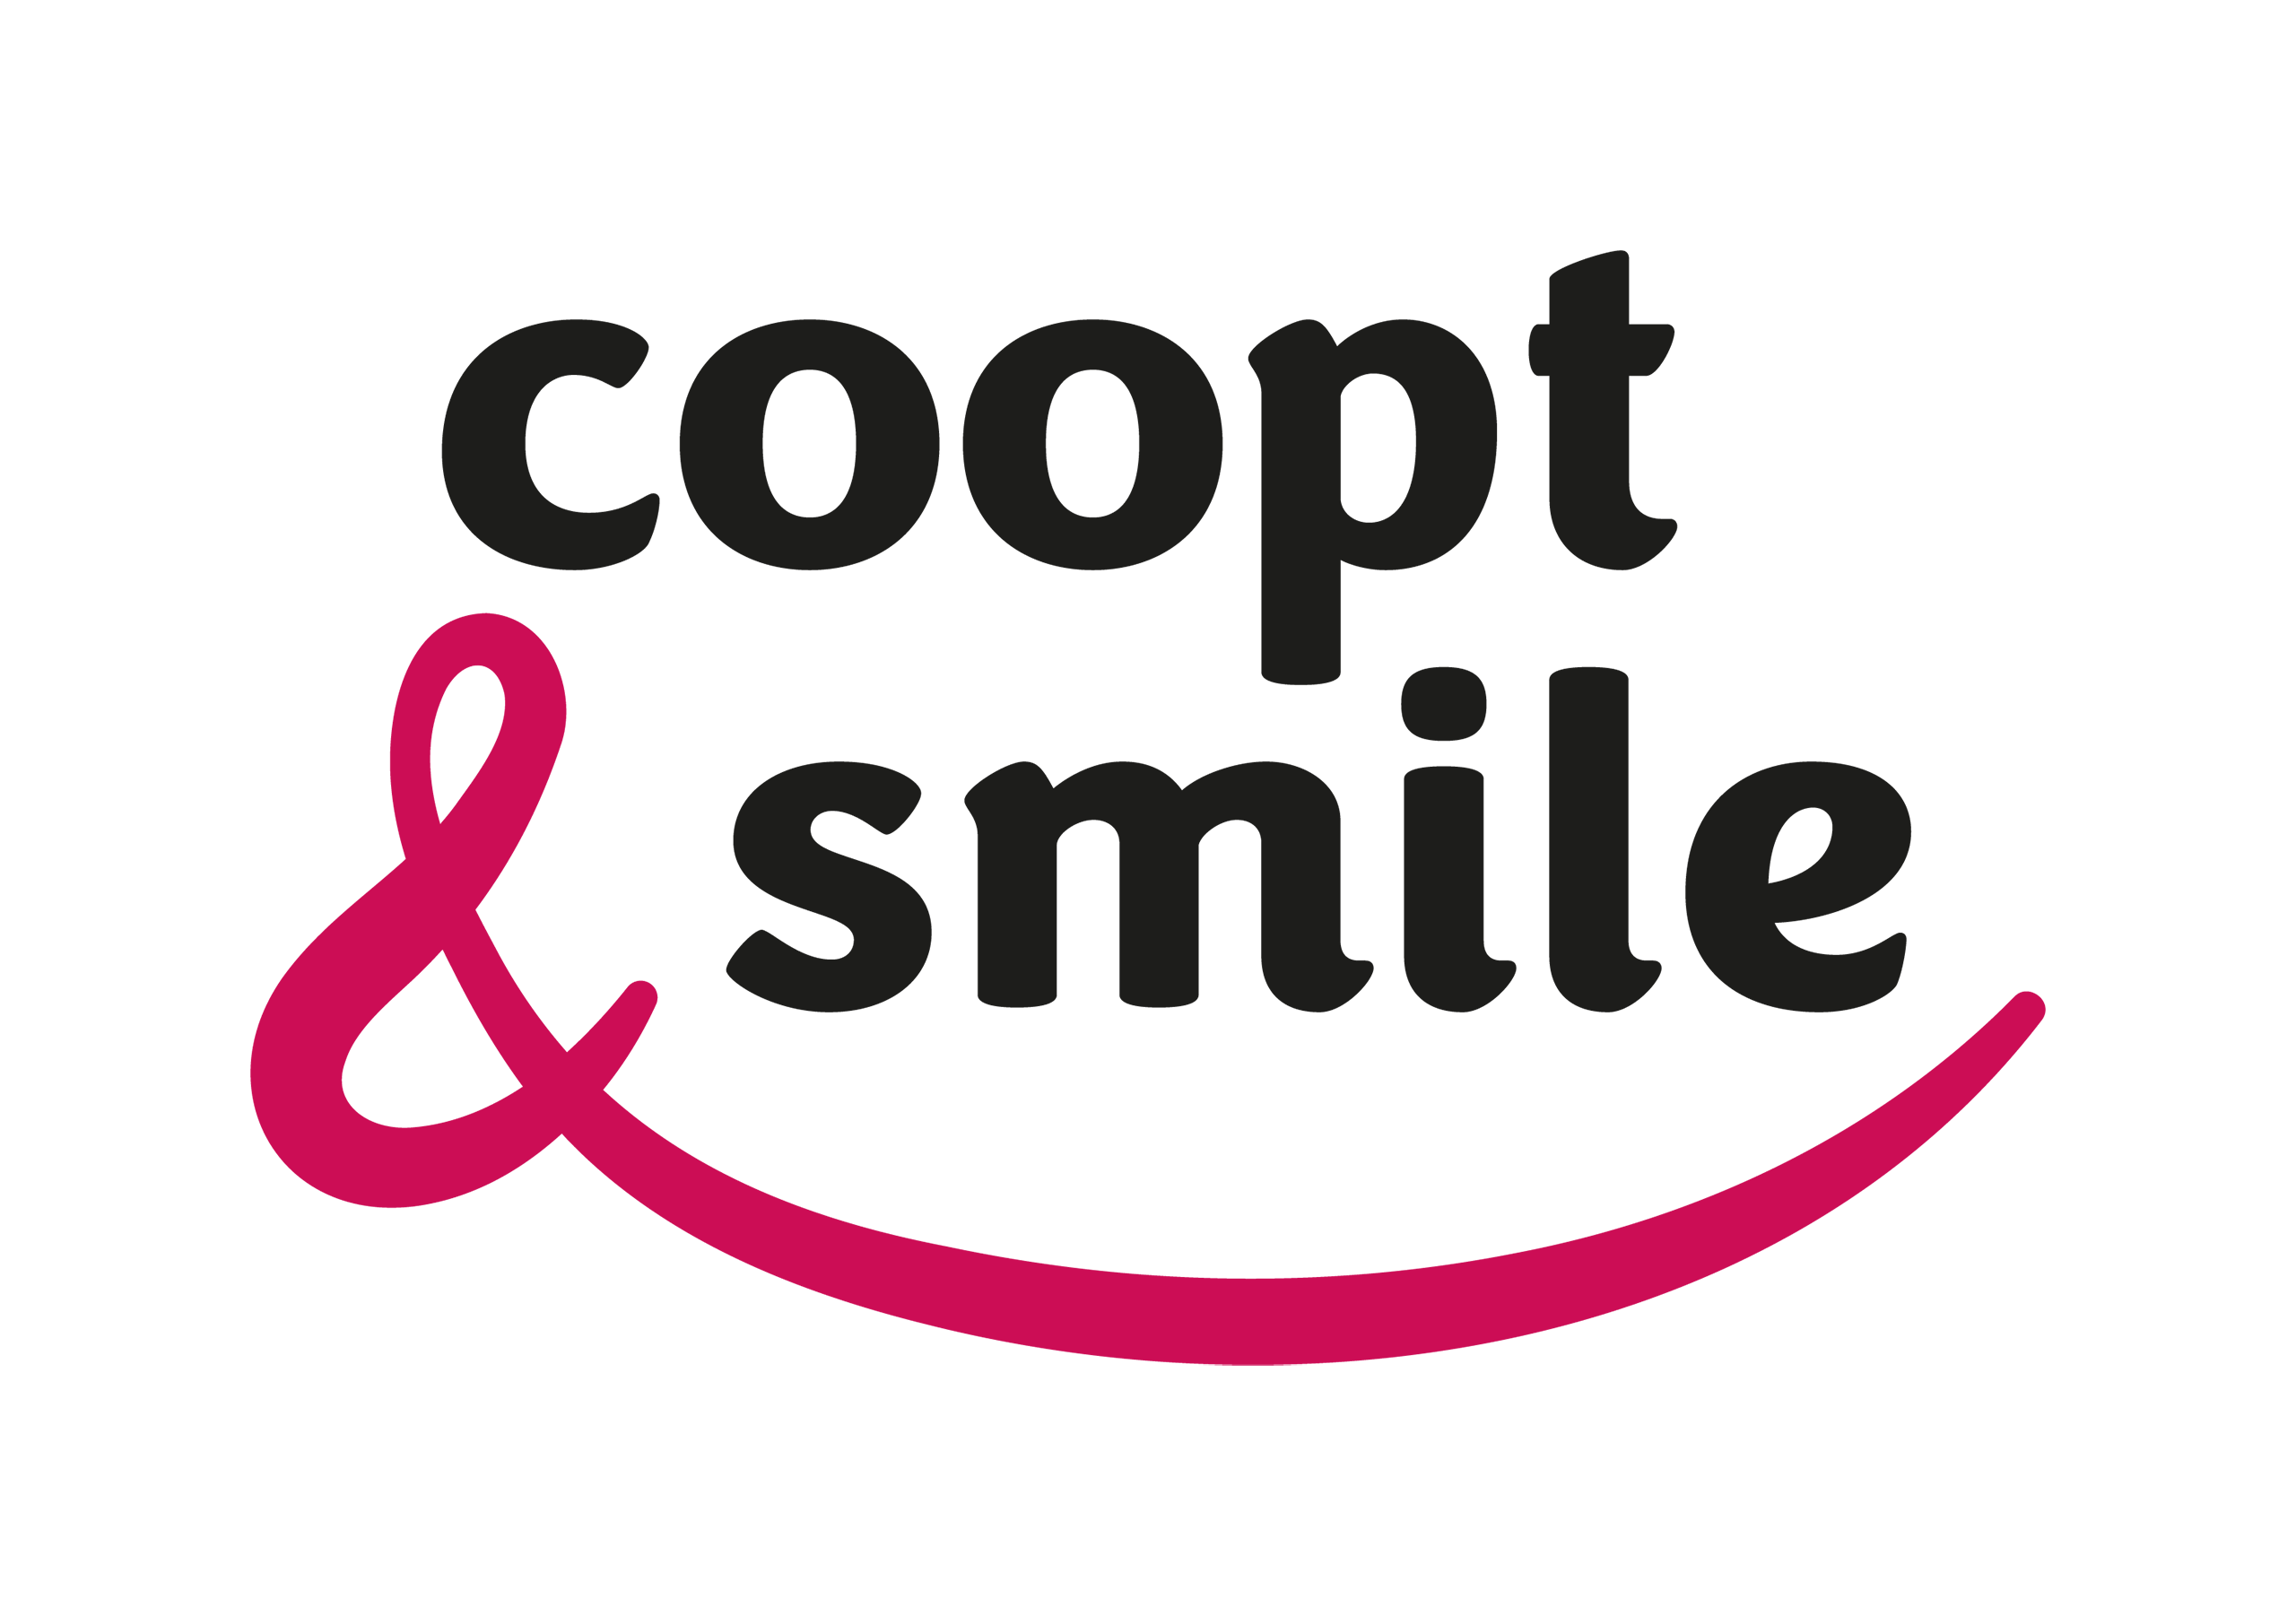 COOPT AND SMILE